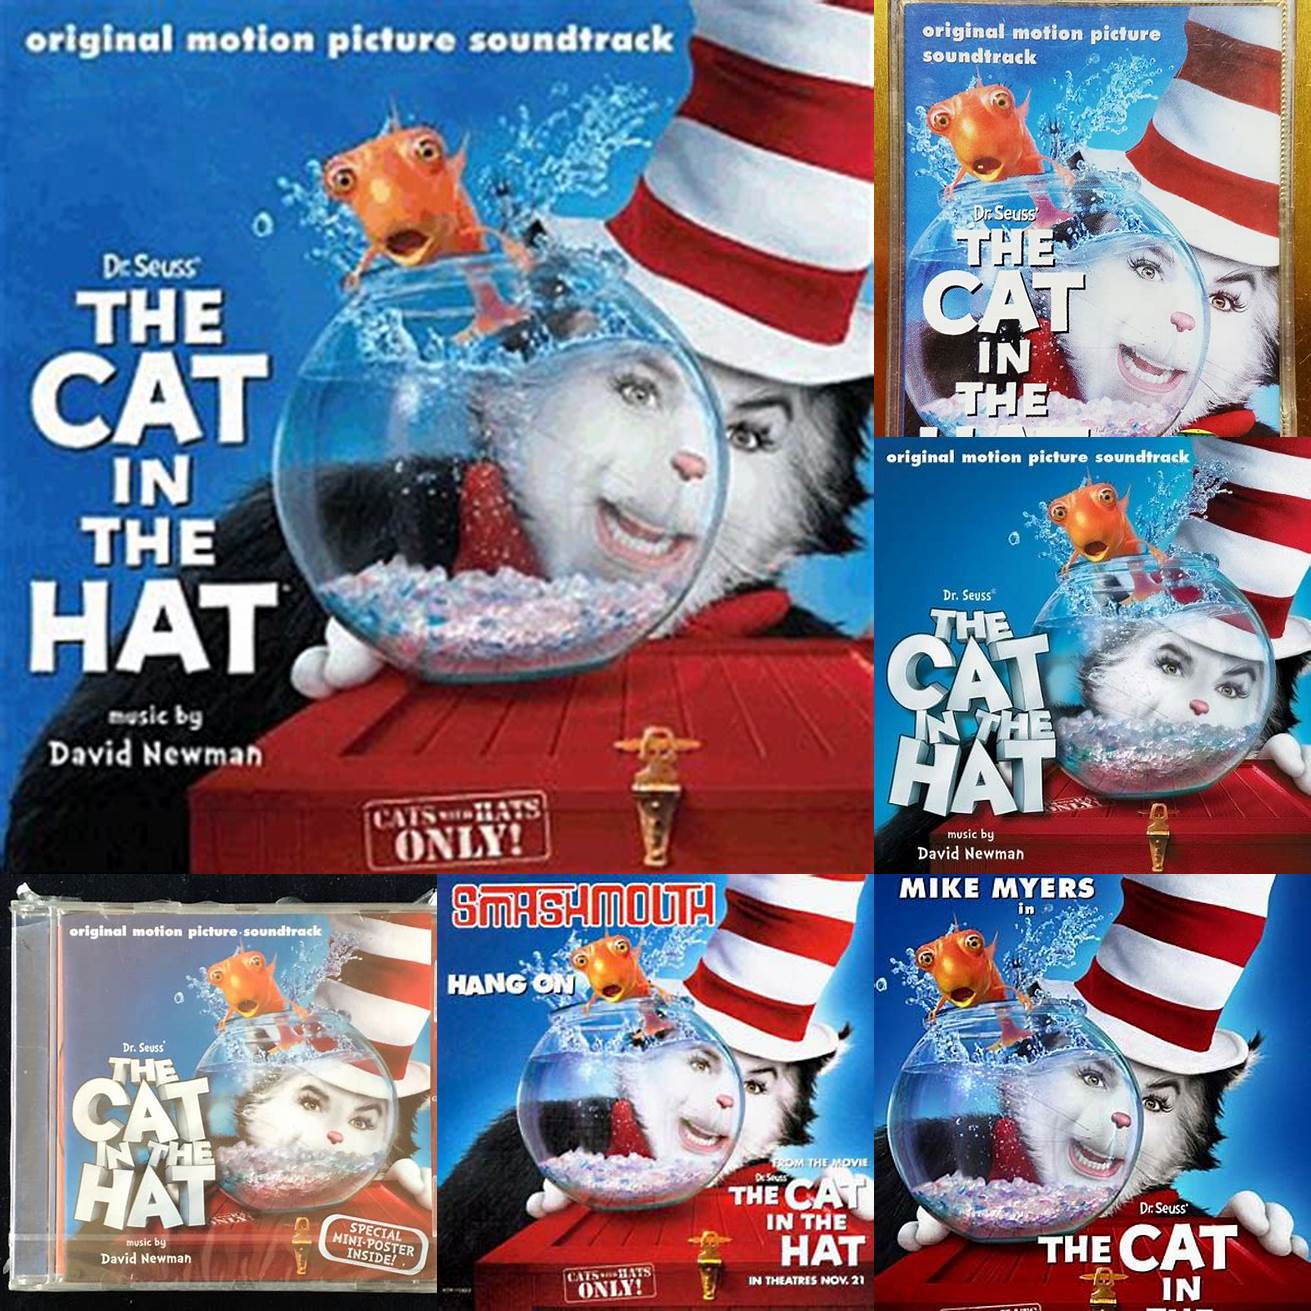 The Cat in the Hat Soundtrack